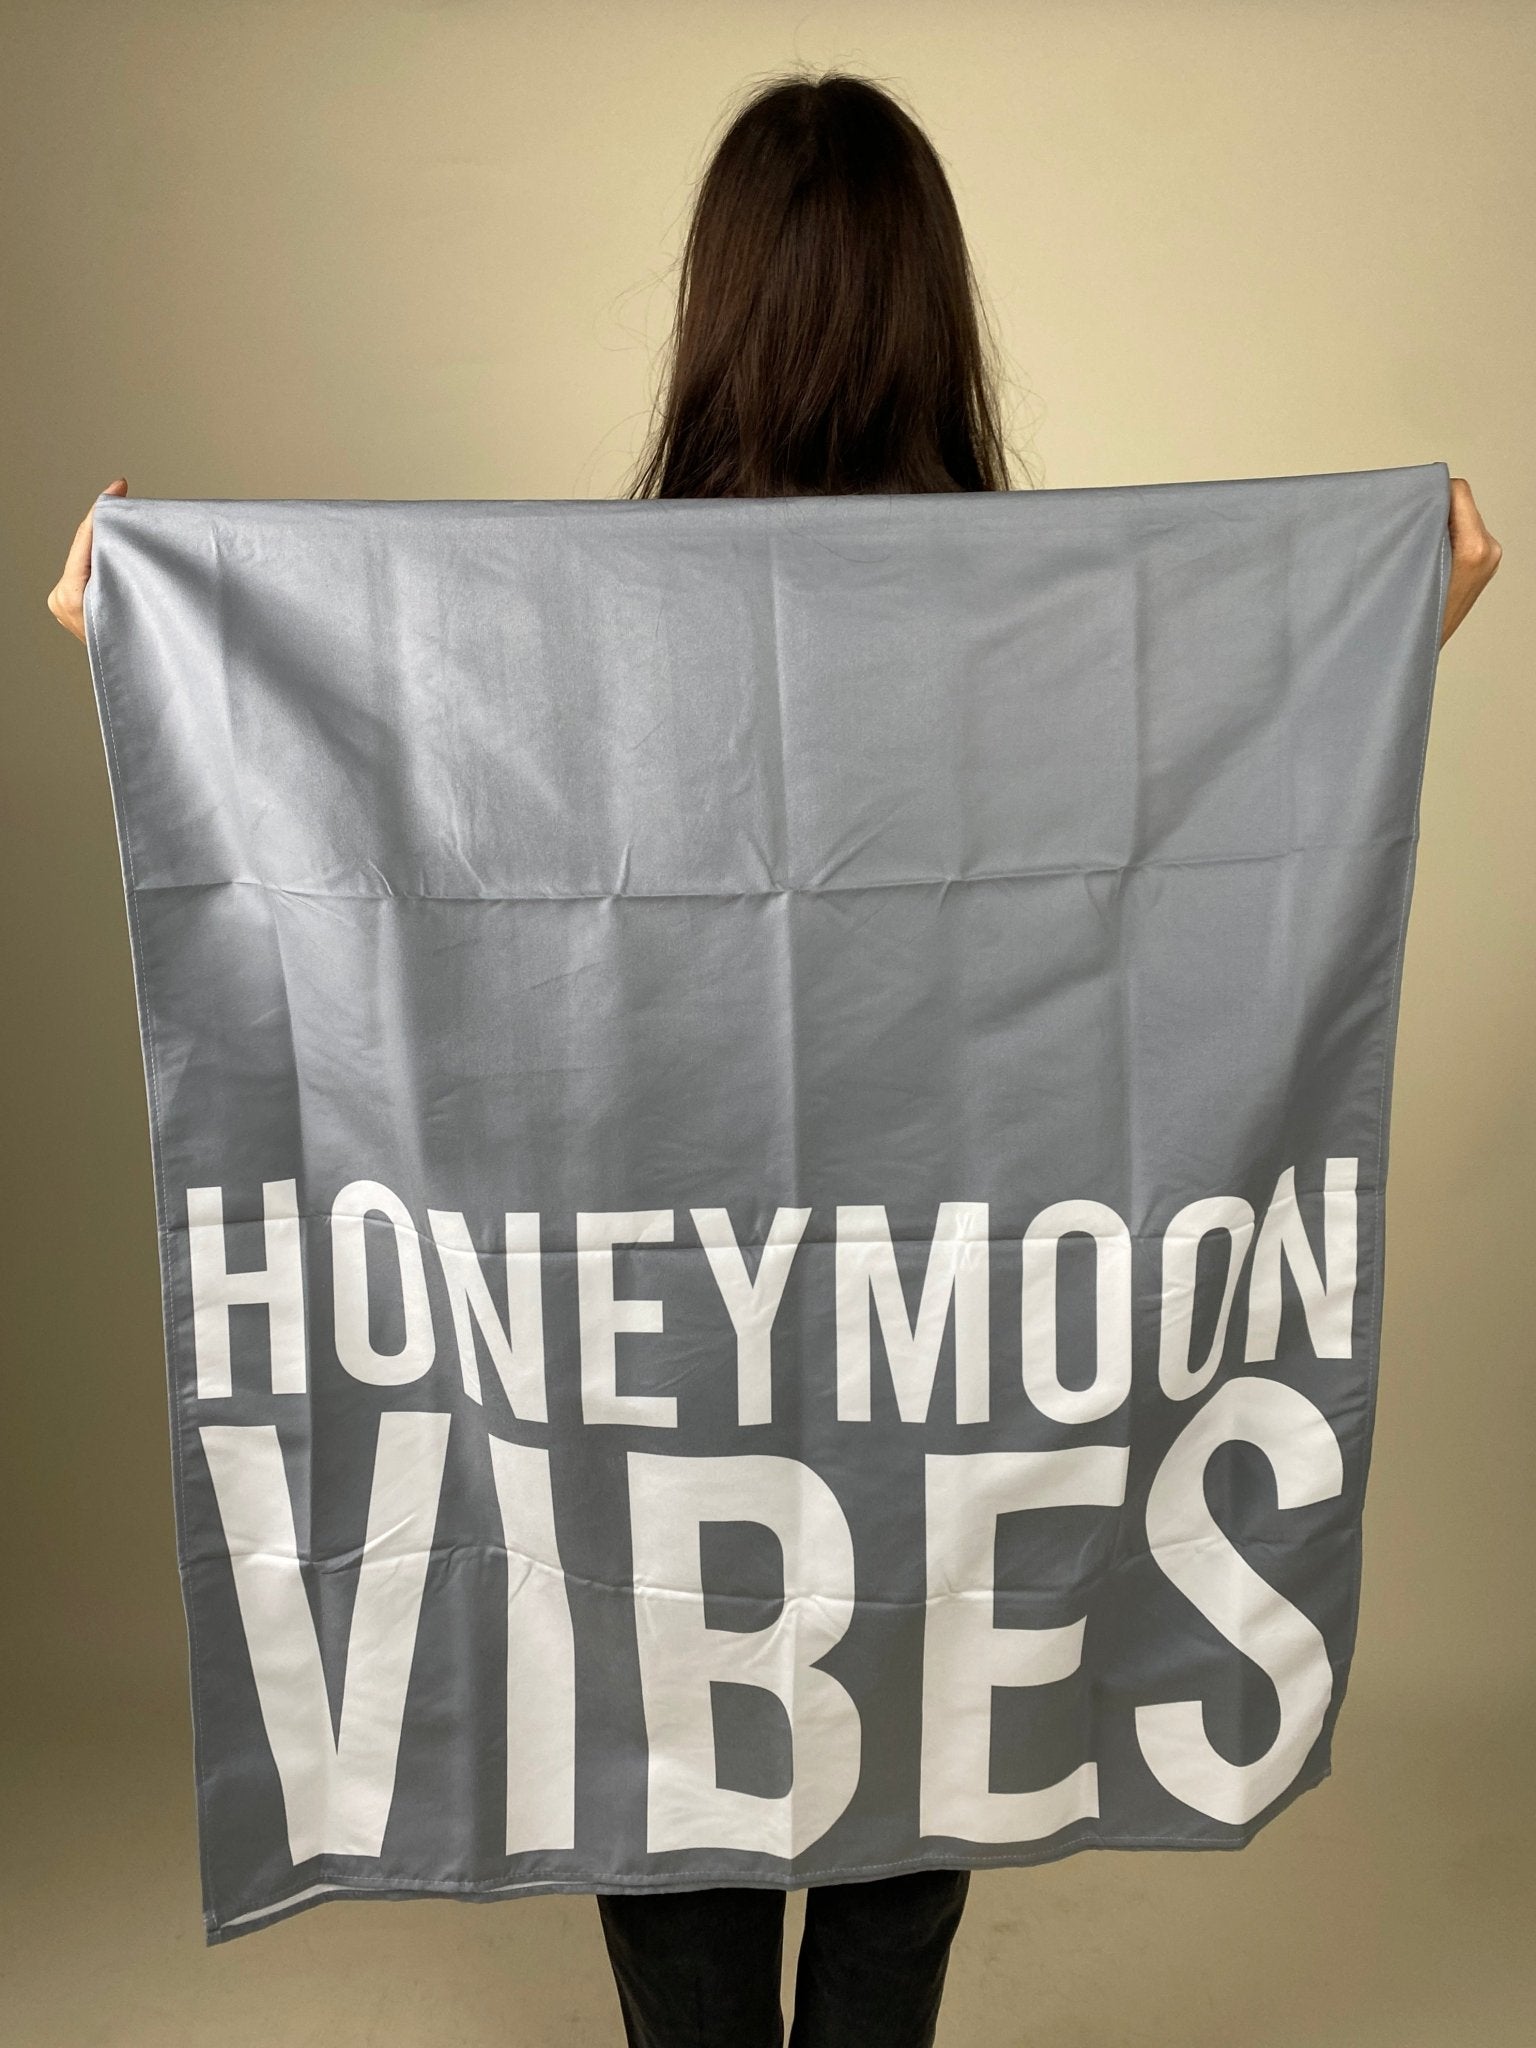 Honeymoon vibes quick dry oversized beach towel sage - Stylish Beach Towels -  Cute Bridal Collection at Lush Fashion Lounge Boutique in Oklahoma City